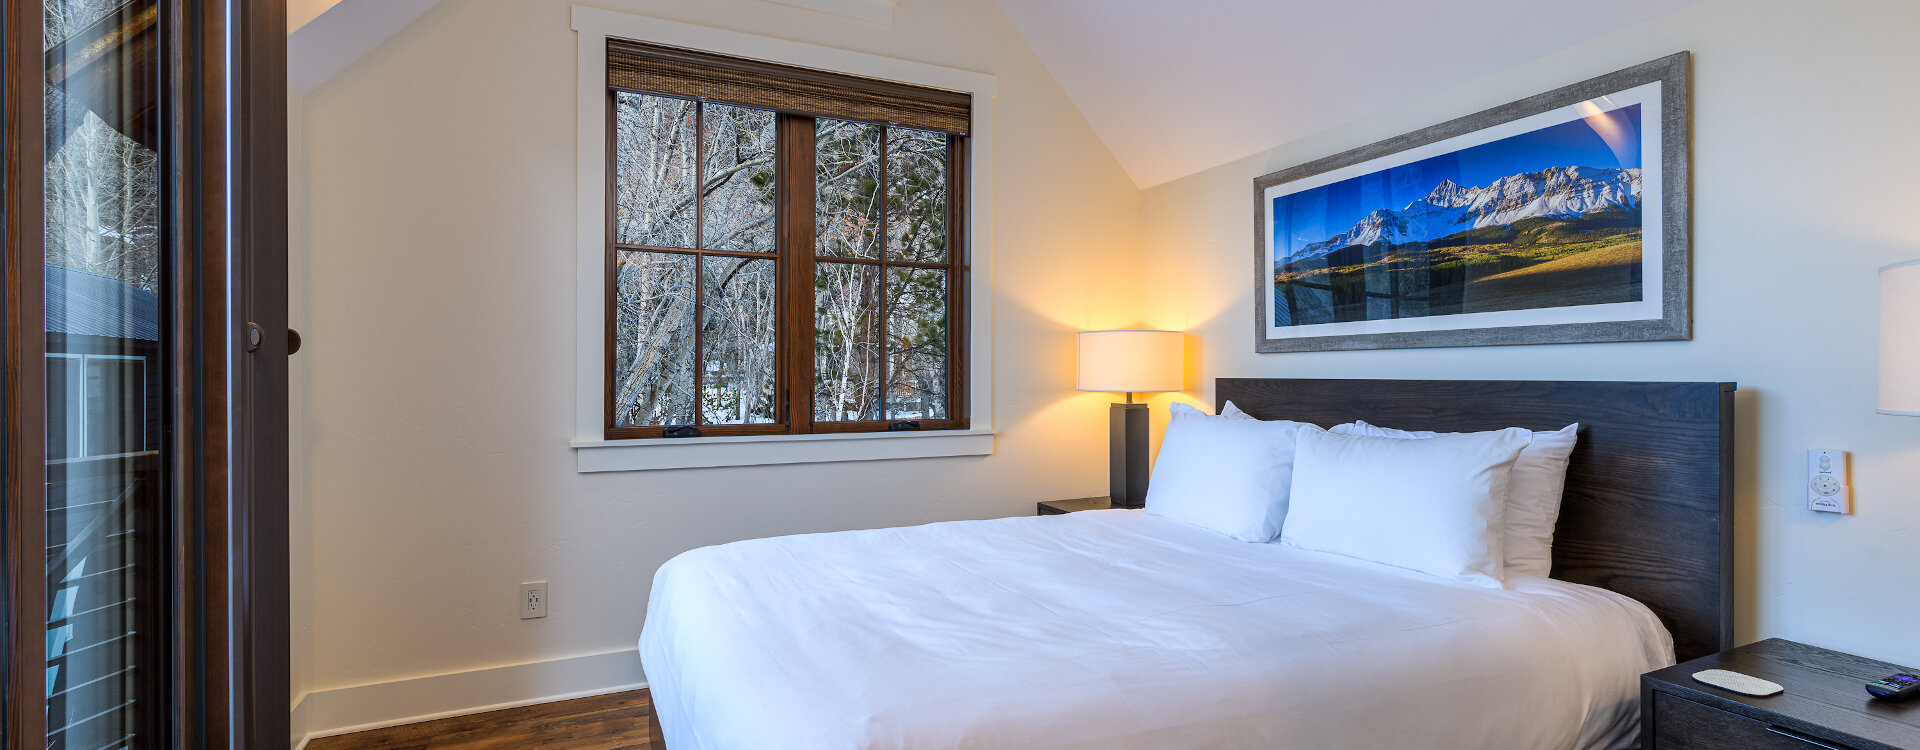 7.0-telluride-the-treehouse-guest-bedroom-2